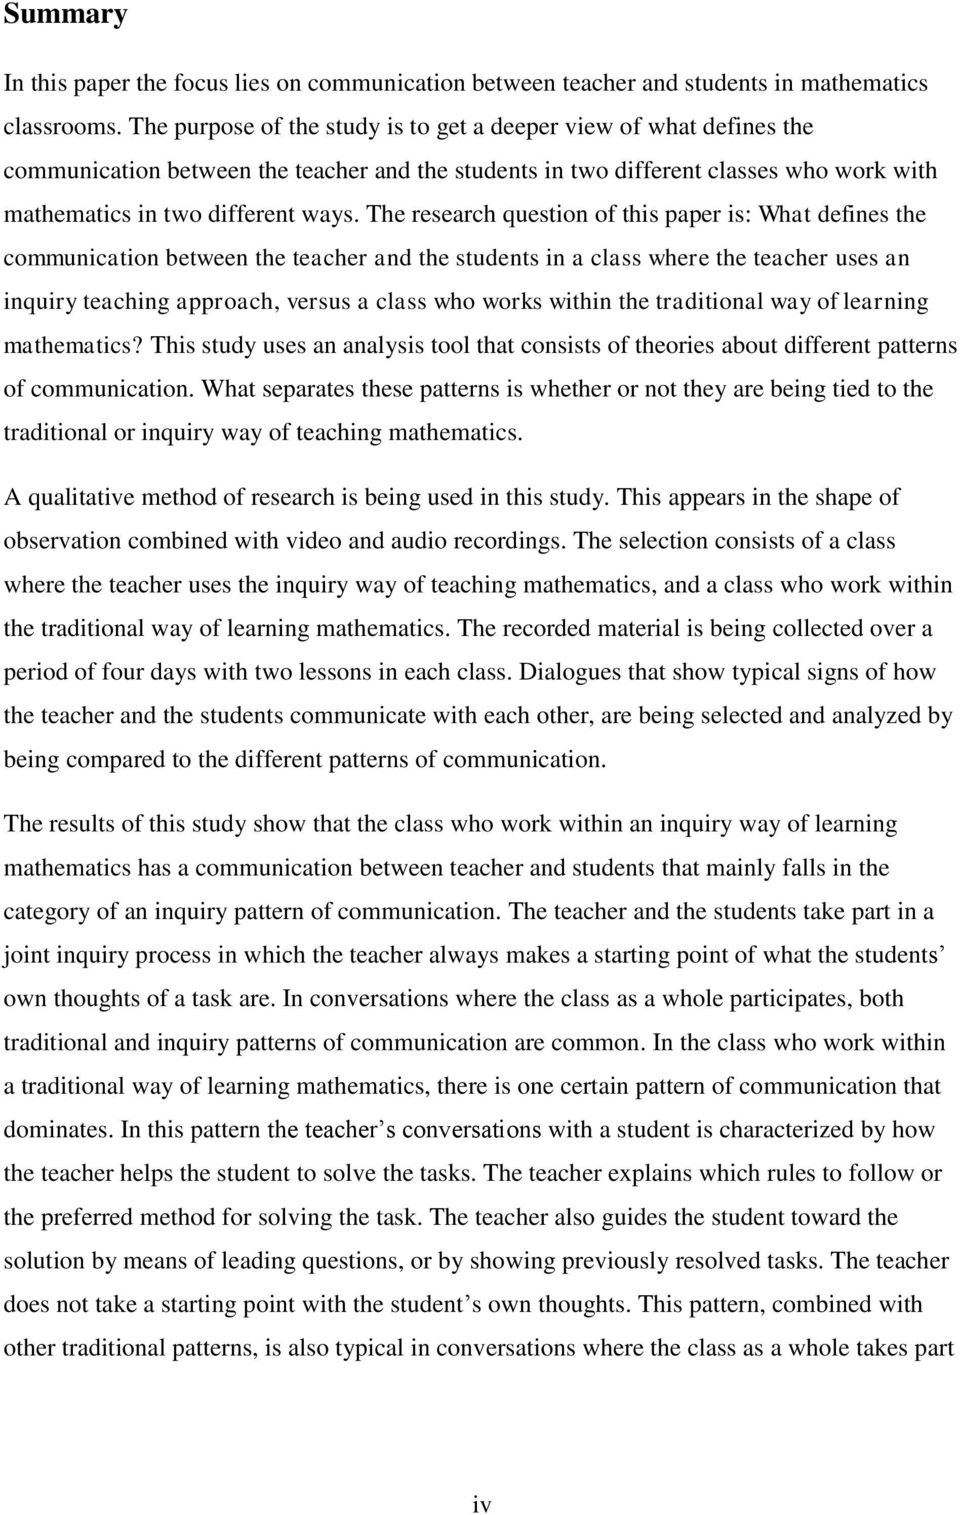 The research question of this paper is: What defines the communication between the teacher and the students in a class where the teacher uses an inquiry teaching approach, versus a class who works